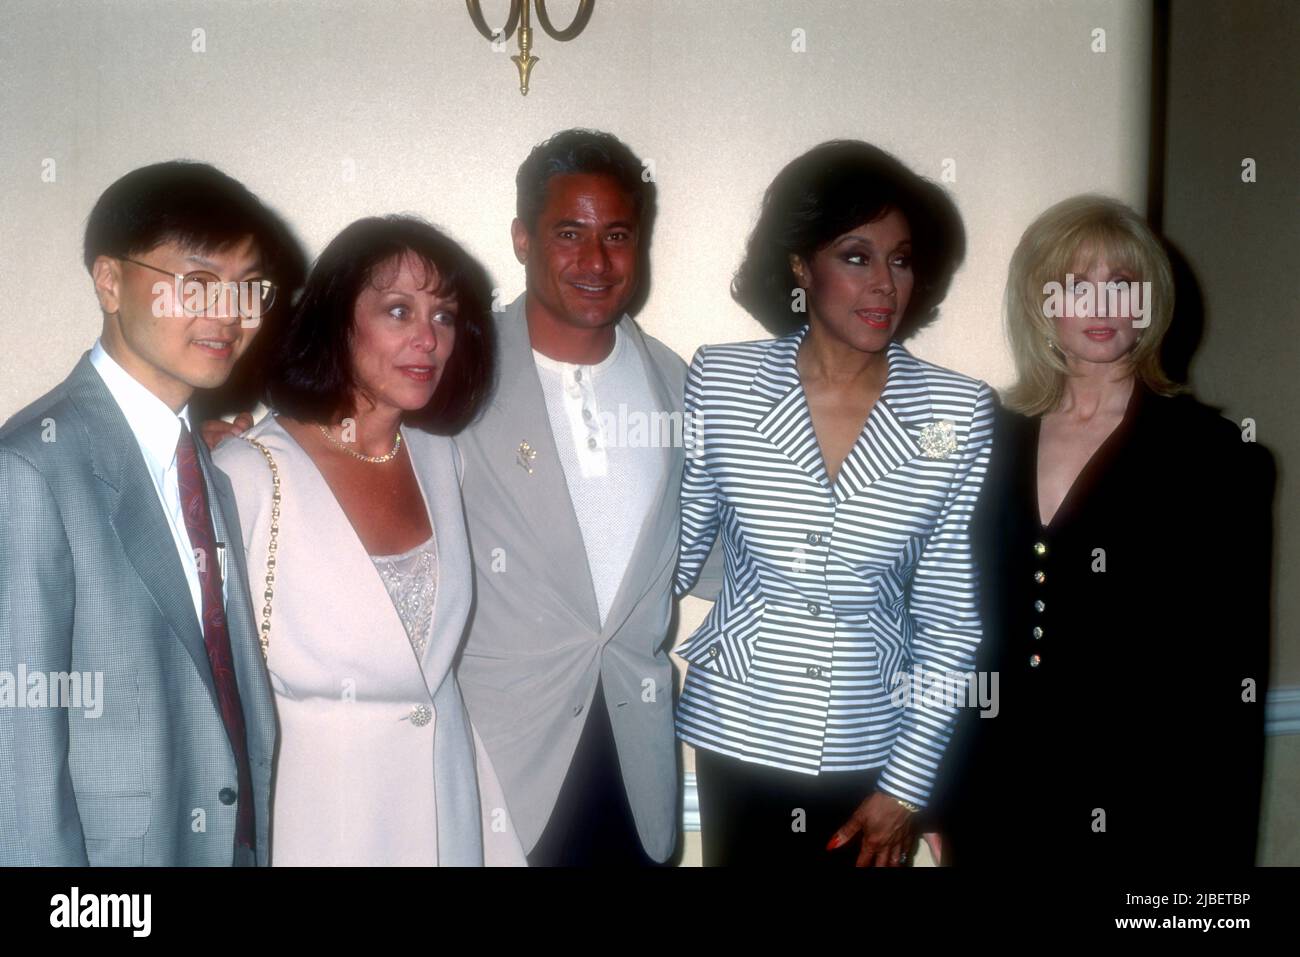 Beverly Hills, California, USA 17th June 1996 Olympian Athlete Greg Louganis, Actress Diahann Carroll and Actress Morgan Fairchild attend Project Inform Awards at The Beverly Hills hotel on June 17, 1996 in Beverly Hills, California, USA. Photo by Barry King/Alamy Stock Photo Stock Photo